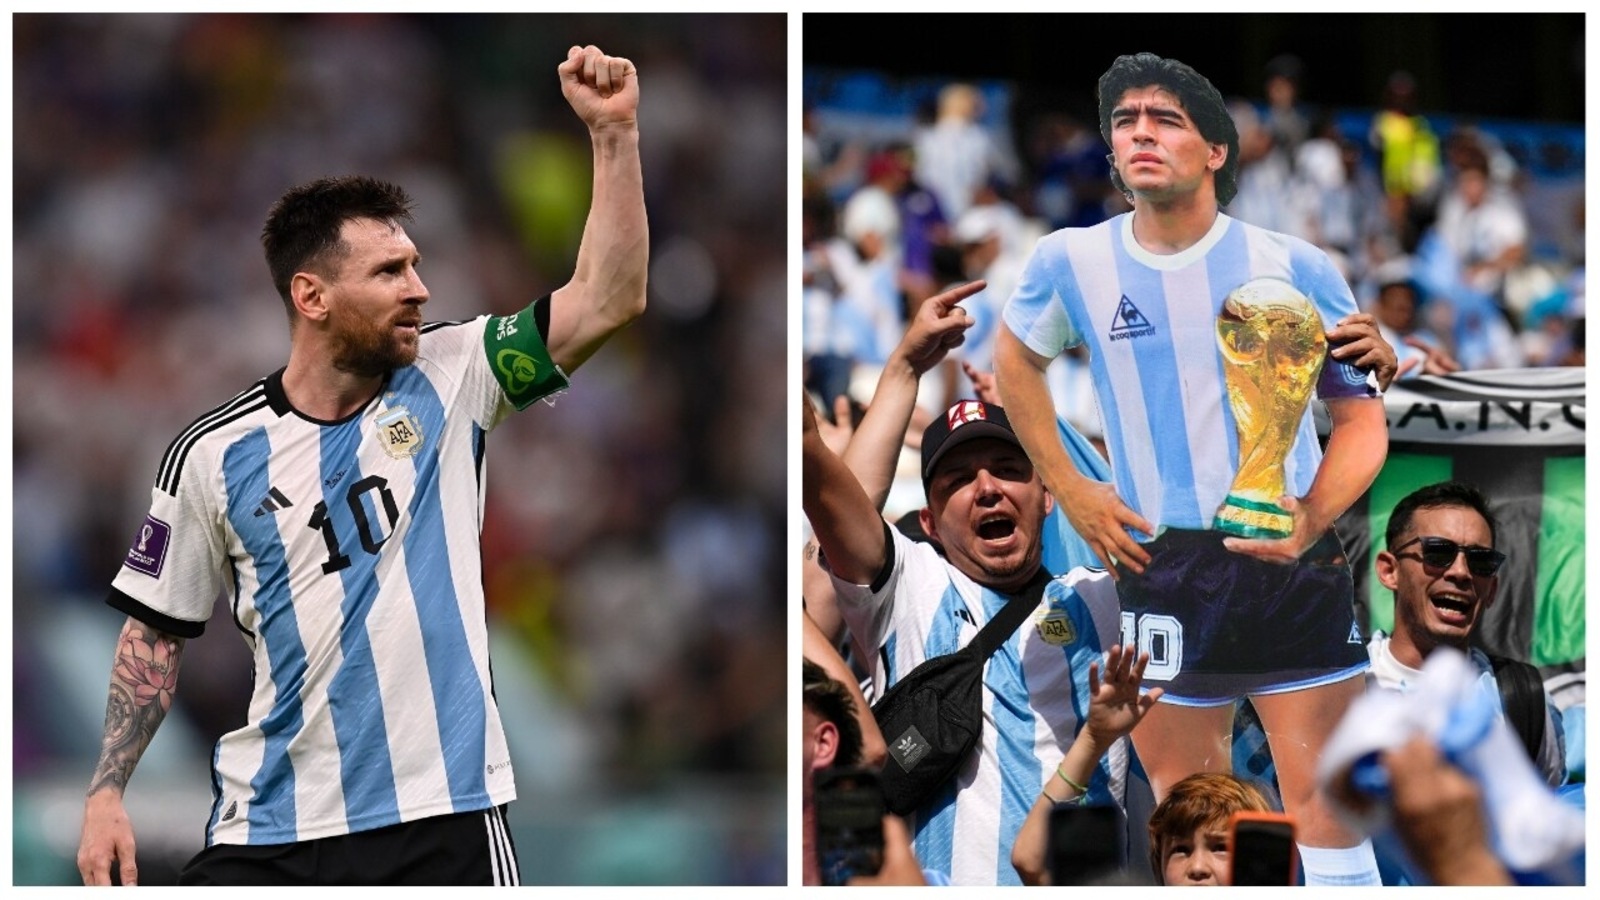 Lionel Messi breaks Maradona’s spectacular record in Argentina’s crucial Group C match against Poland at FIFA World Cup